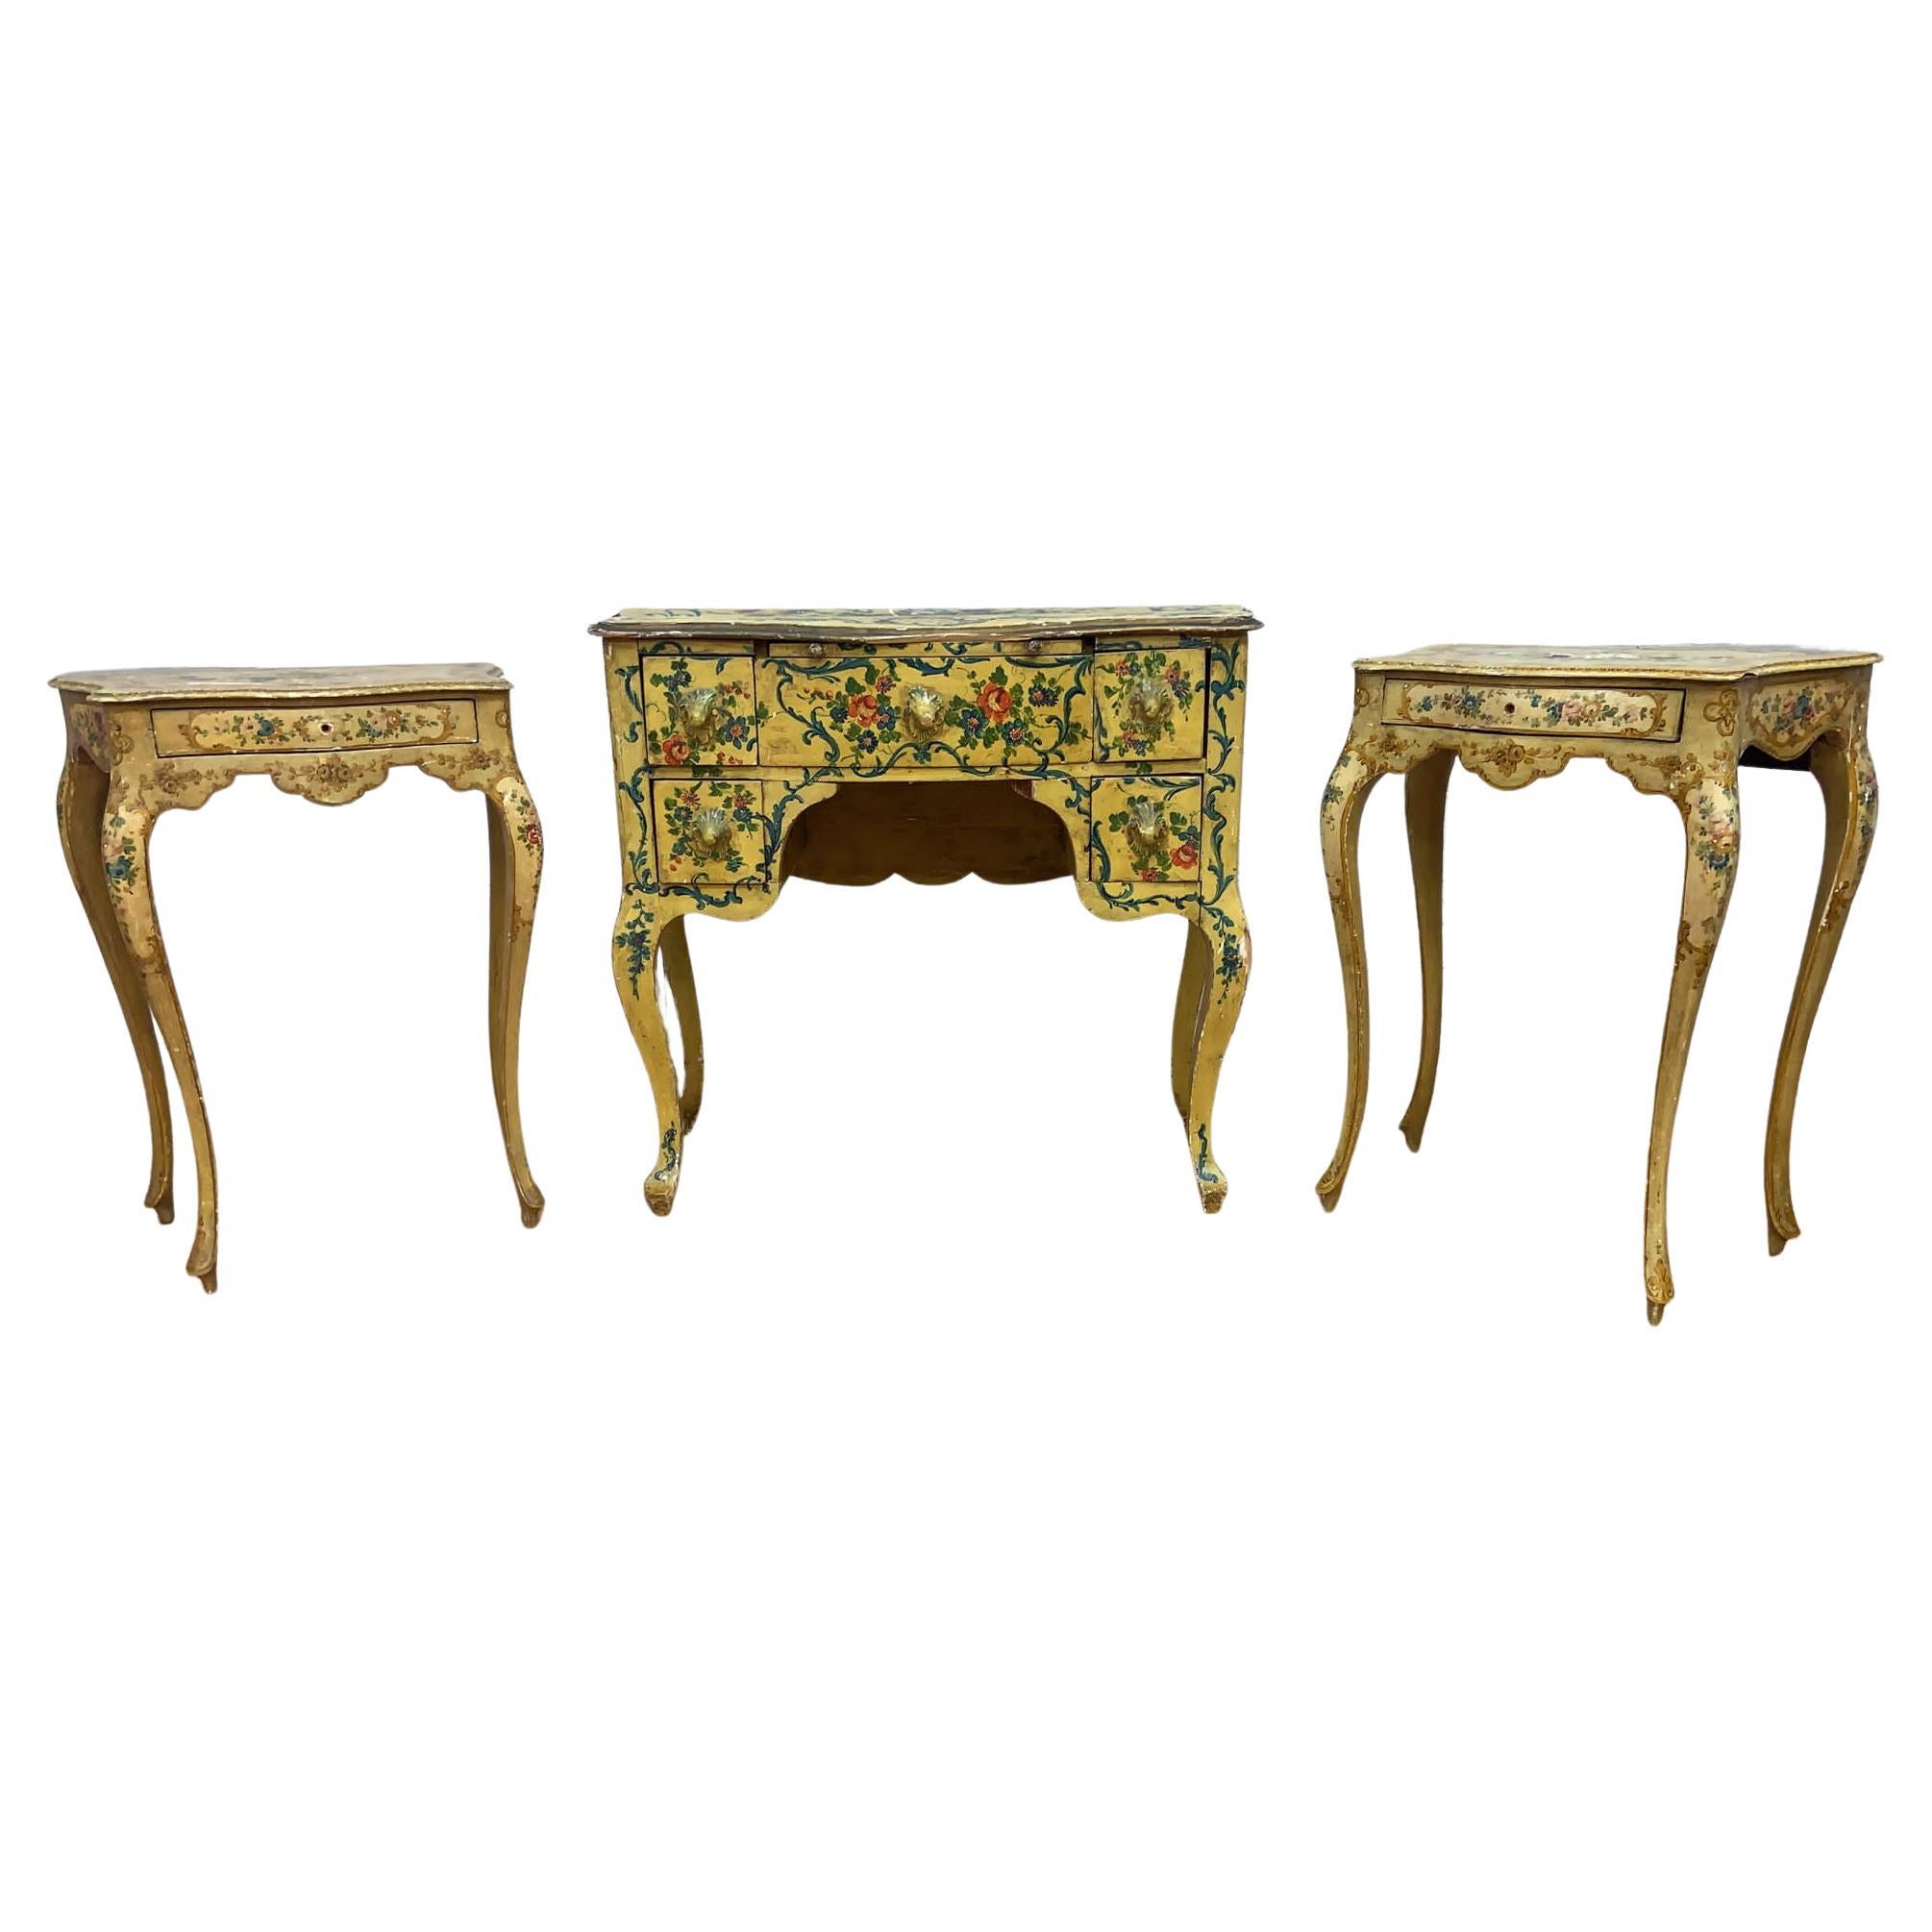 Antique Rococo Style Venetian Hand Painted Vanity Desk & Side Tables, Set of 3